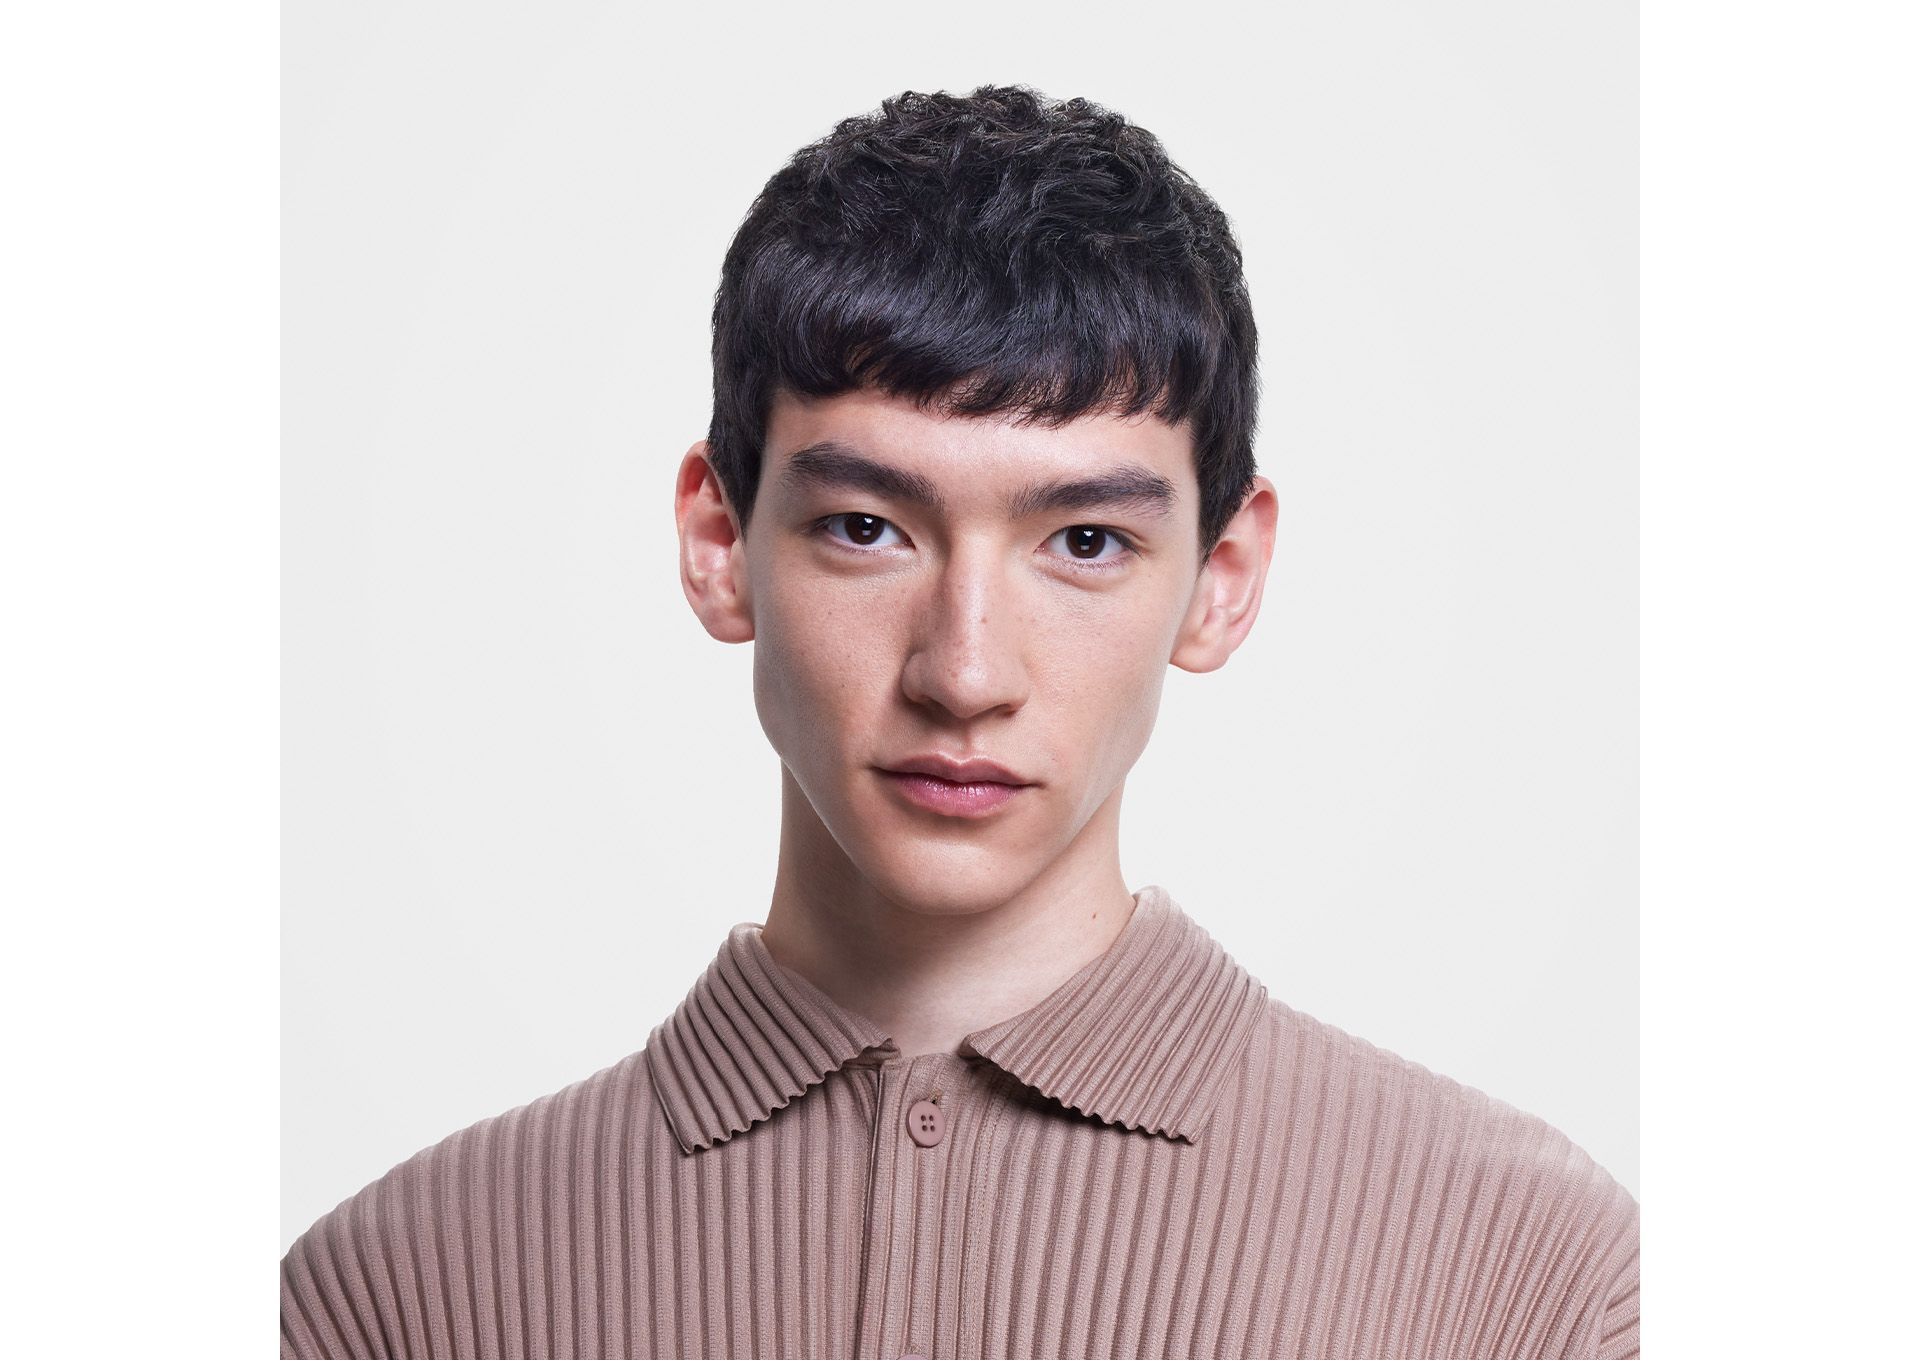 Male model with short, straight hair